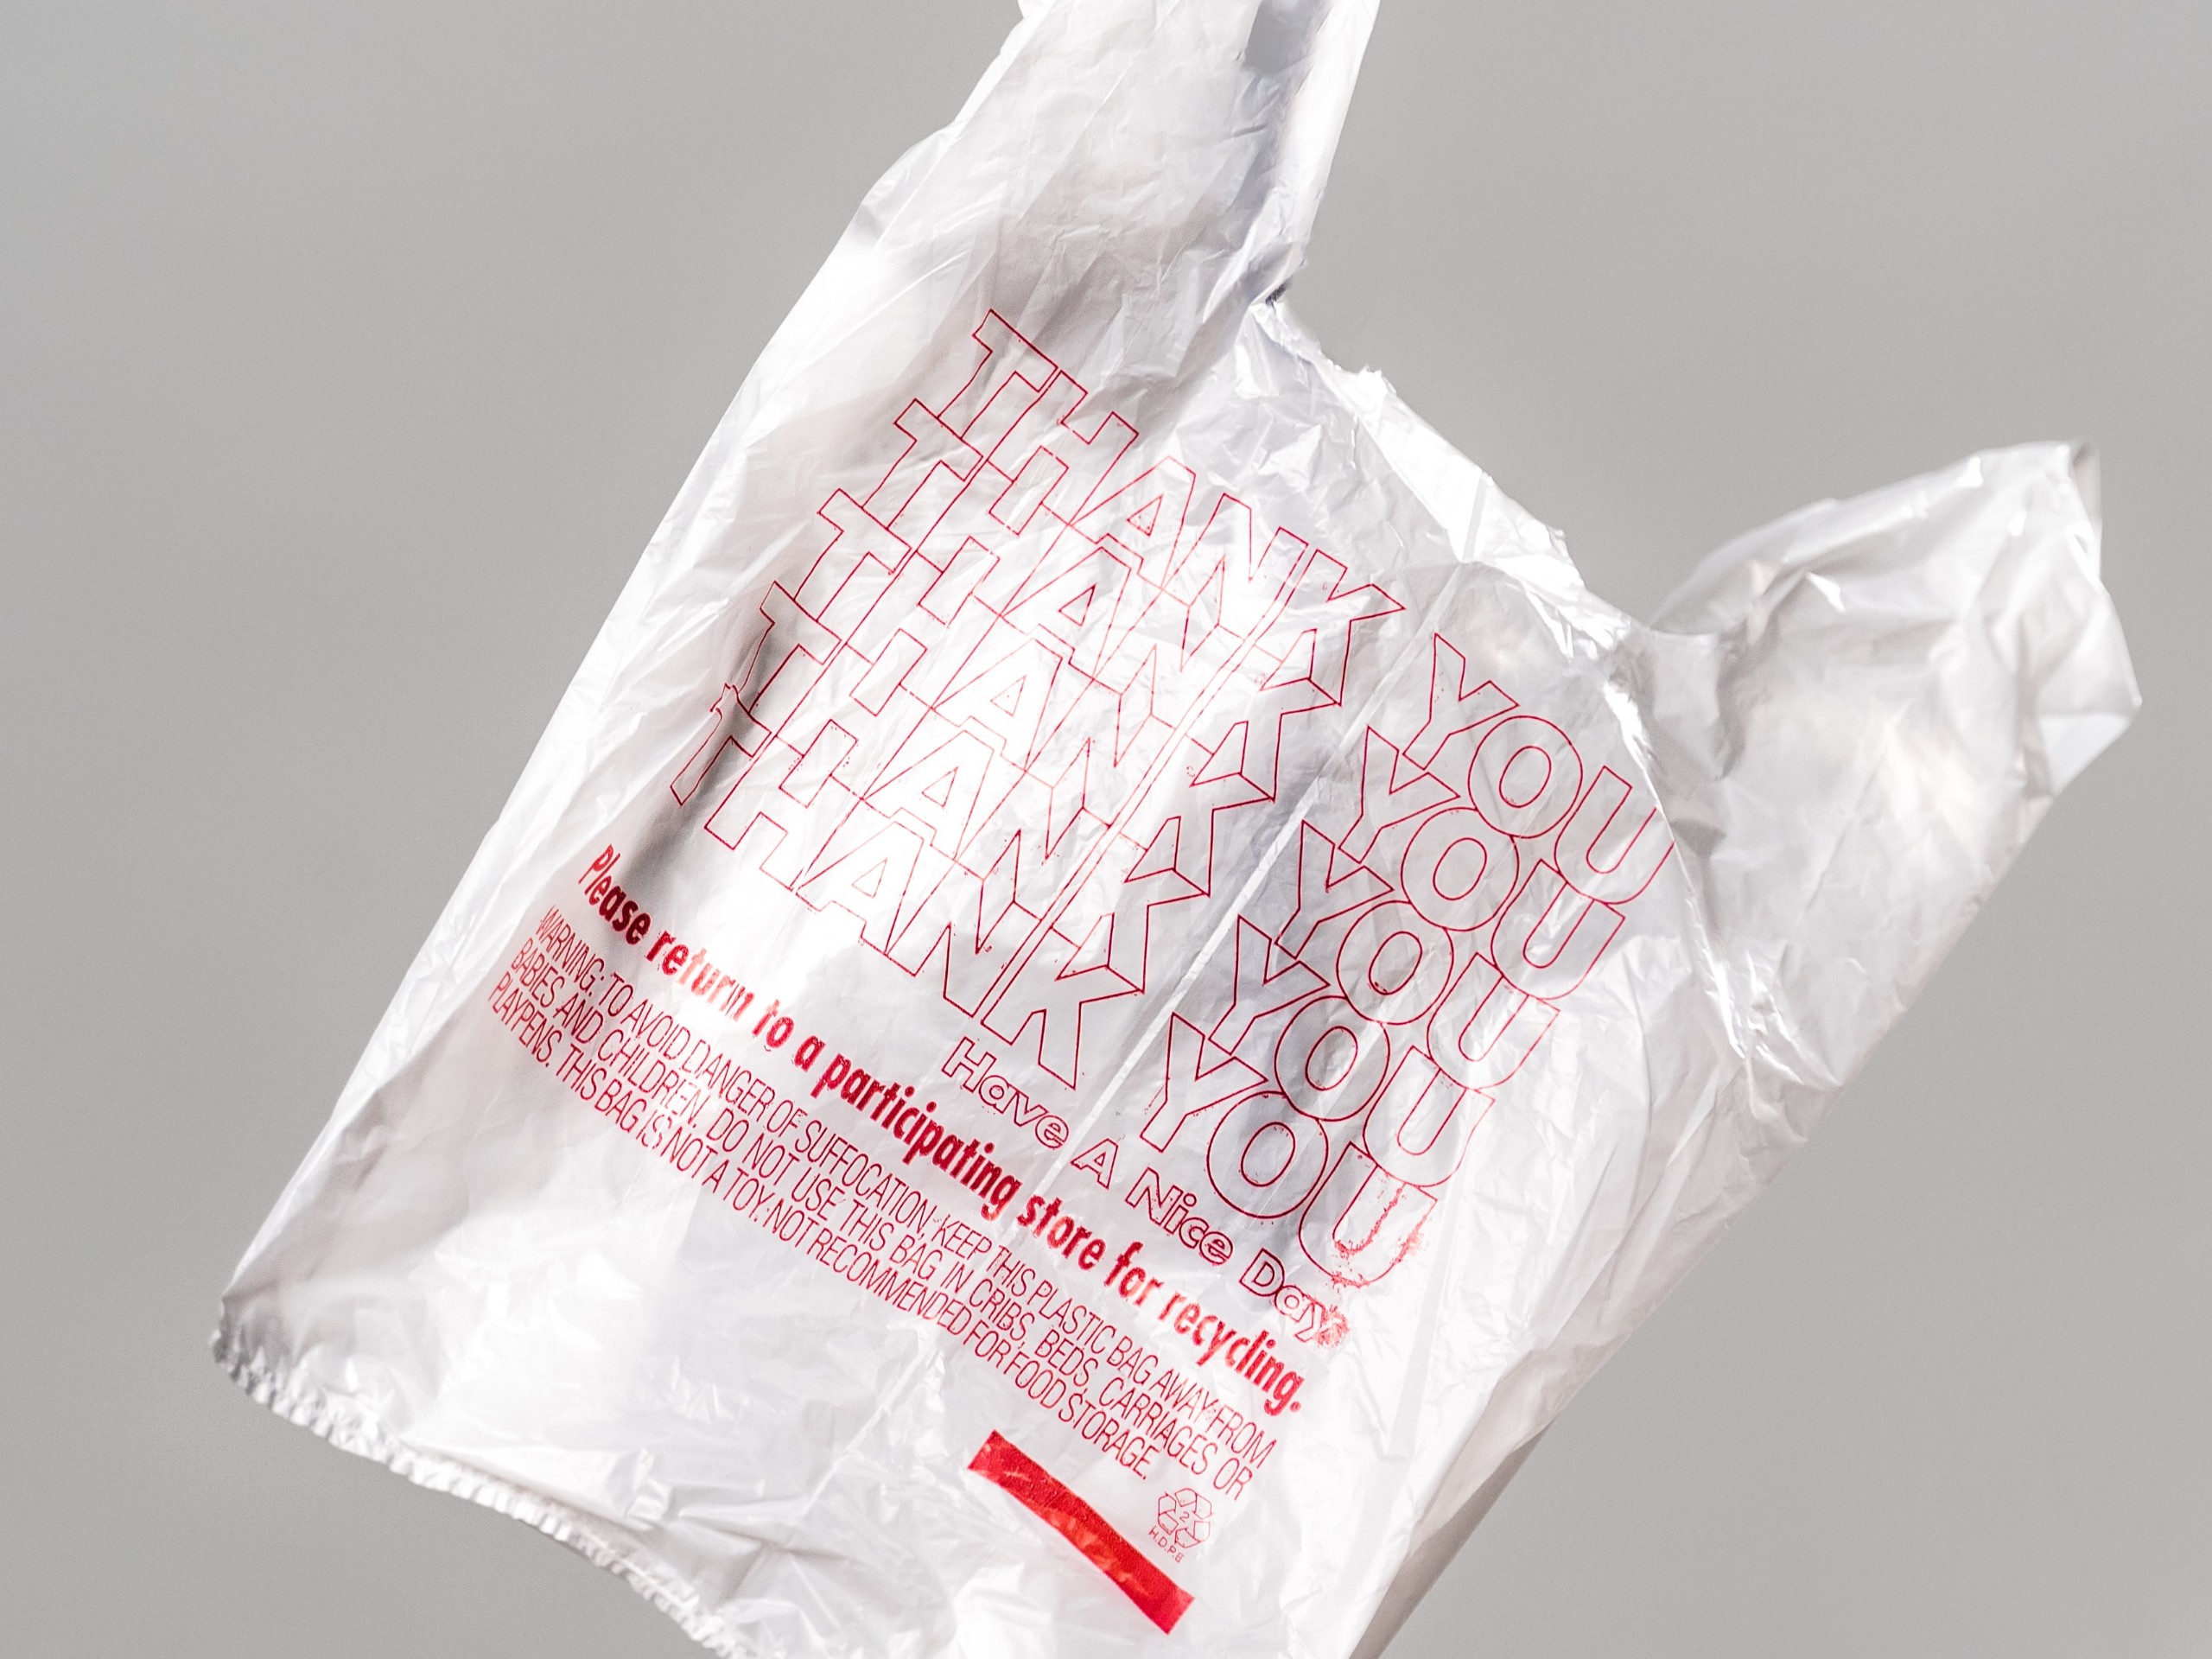 Reusable grocery bags aren’t as environmentally friendly as you might think